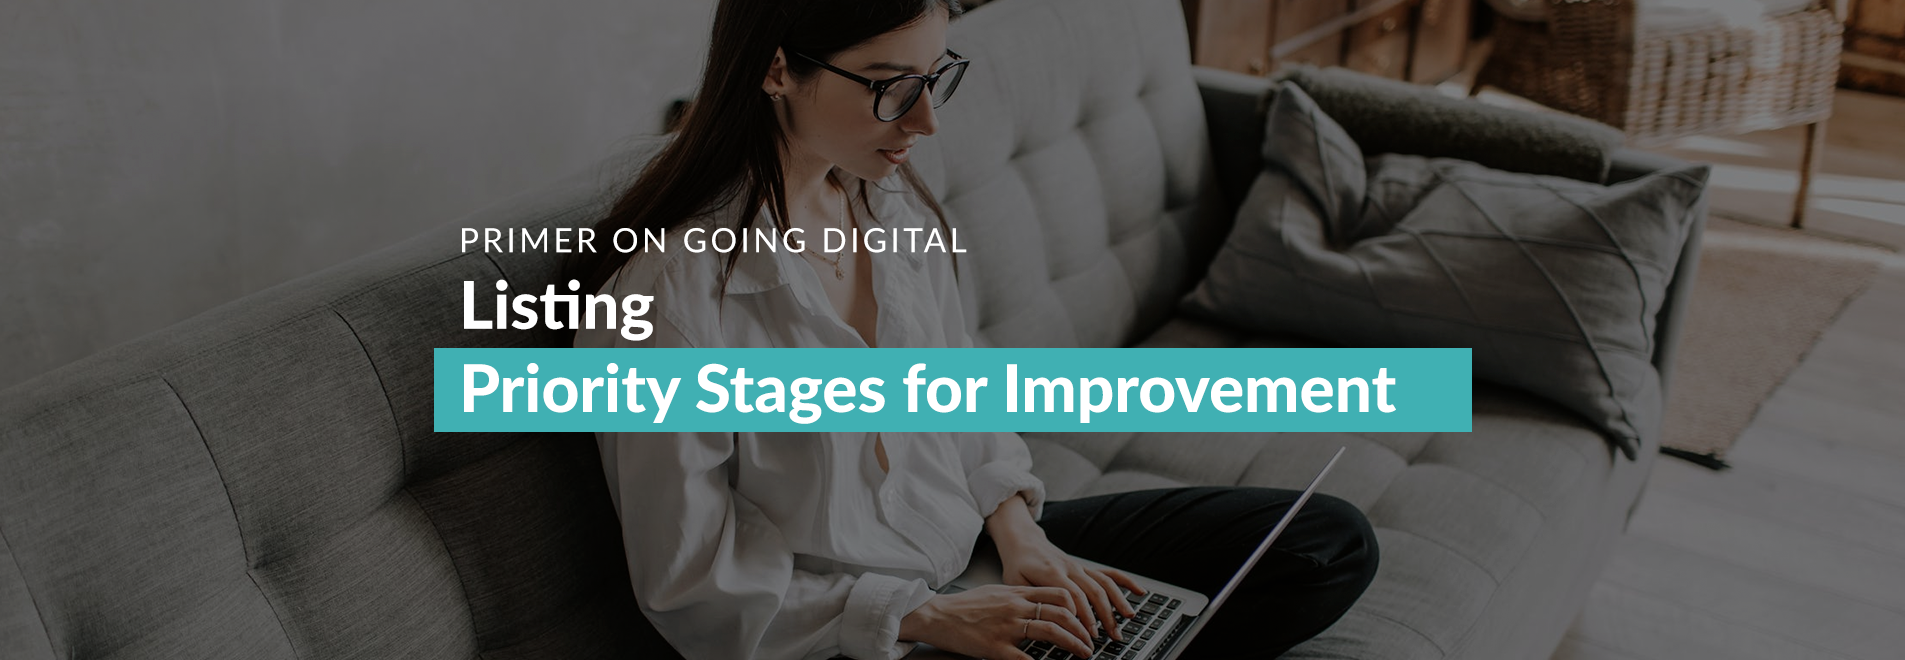 Banner: Listing Priority Stages for Improvement | Primer on Going Digital